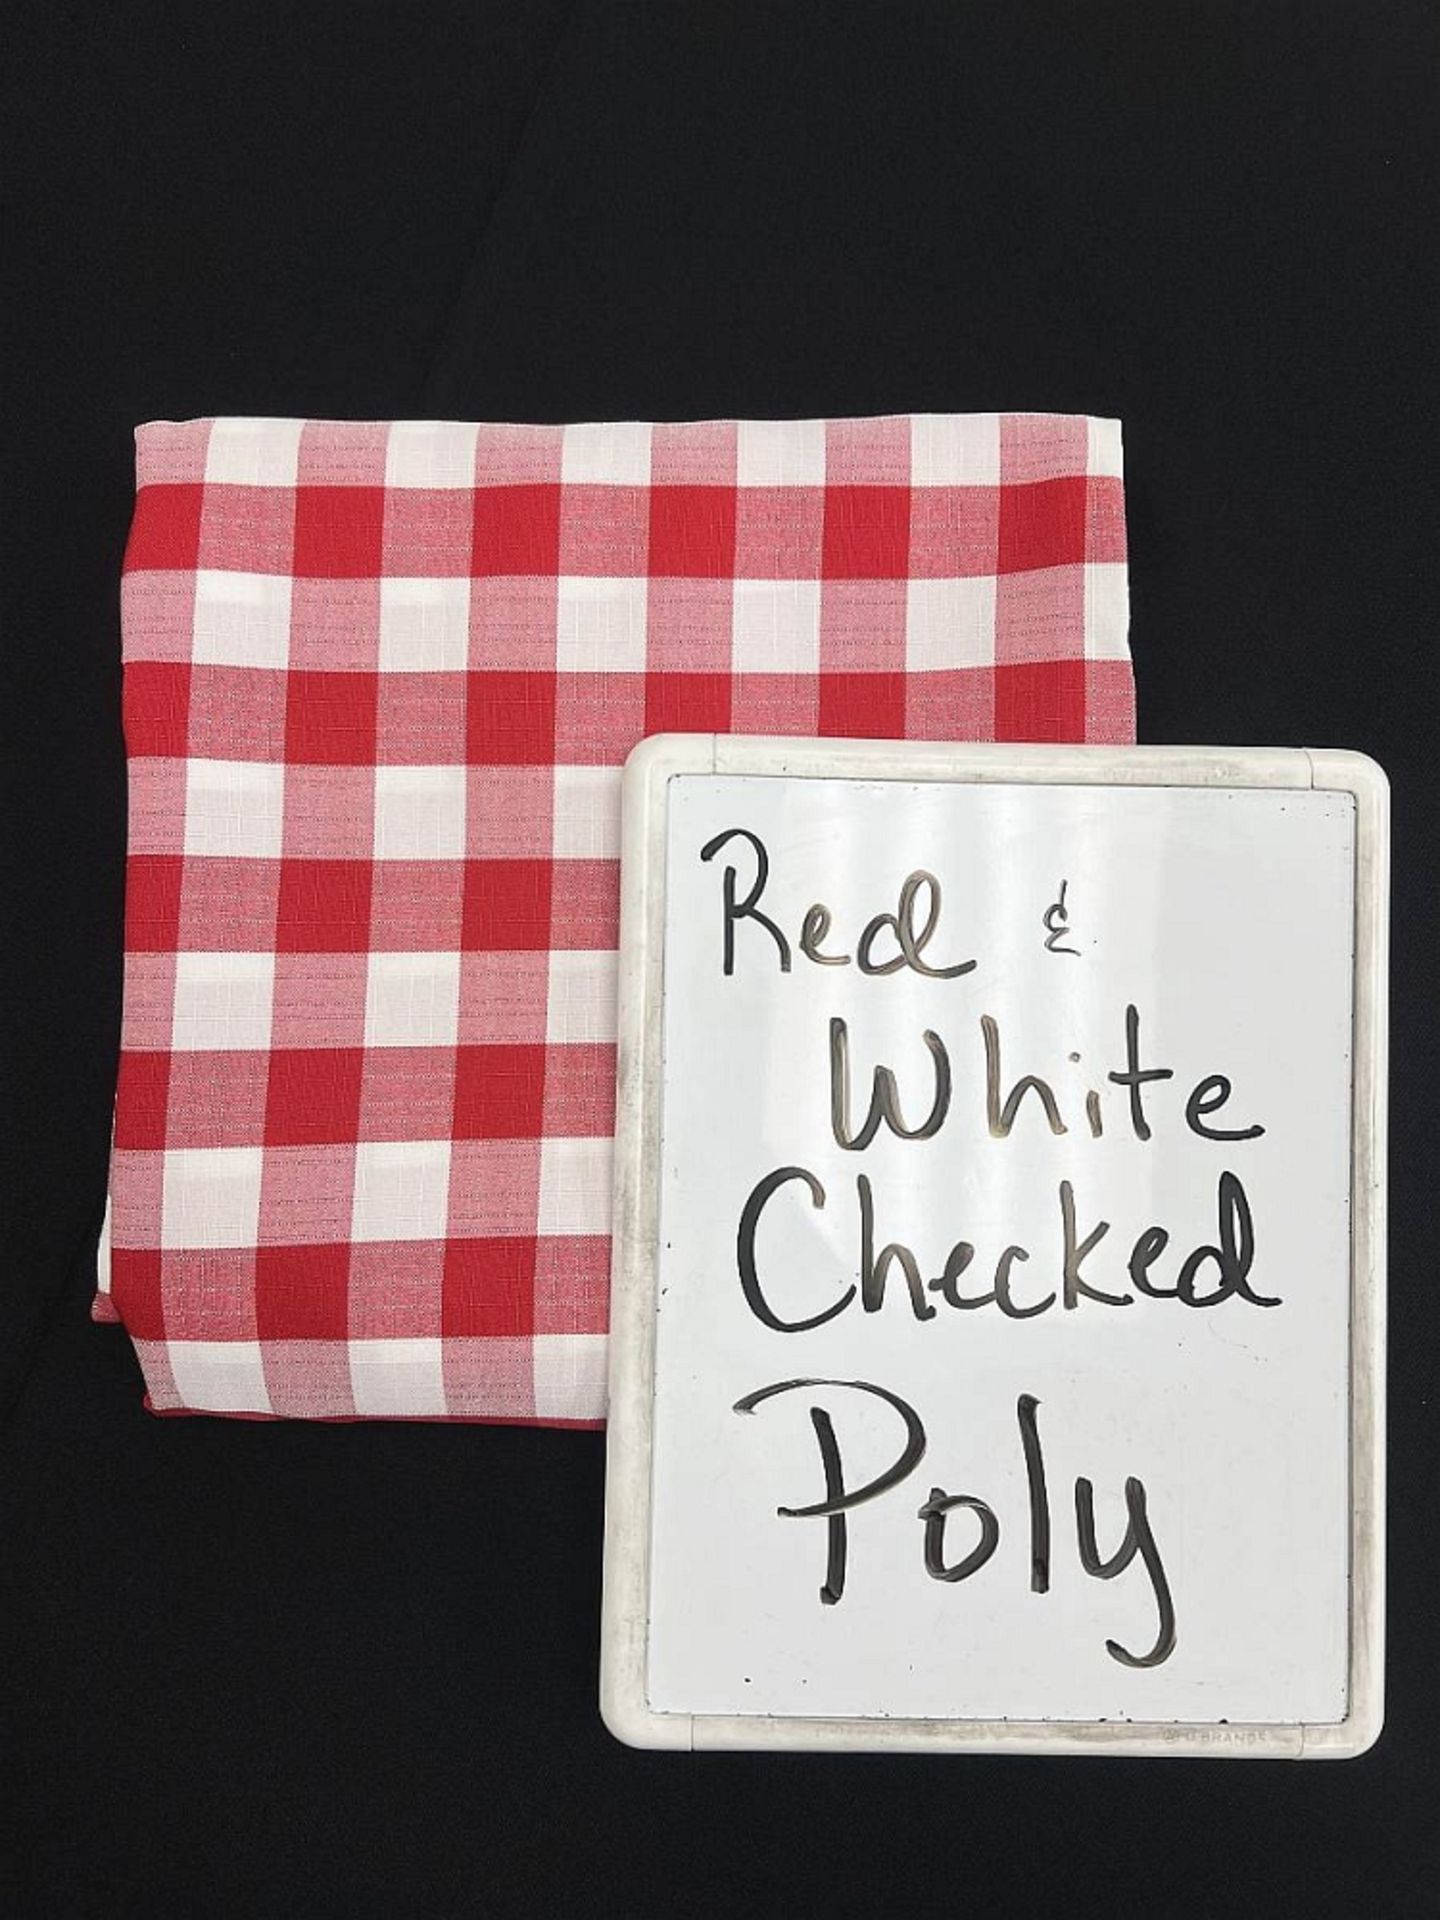 90" x 156" Banquet A-1 Red & White Check Poly